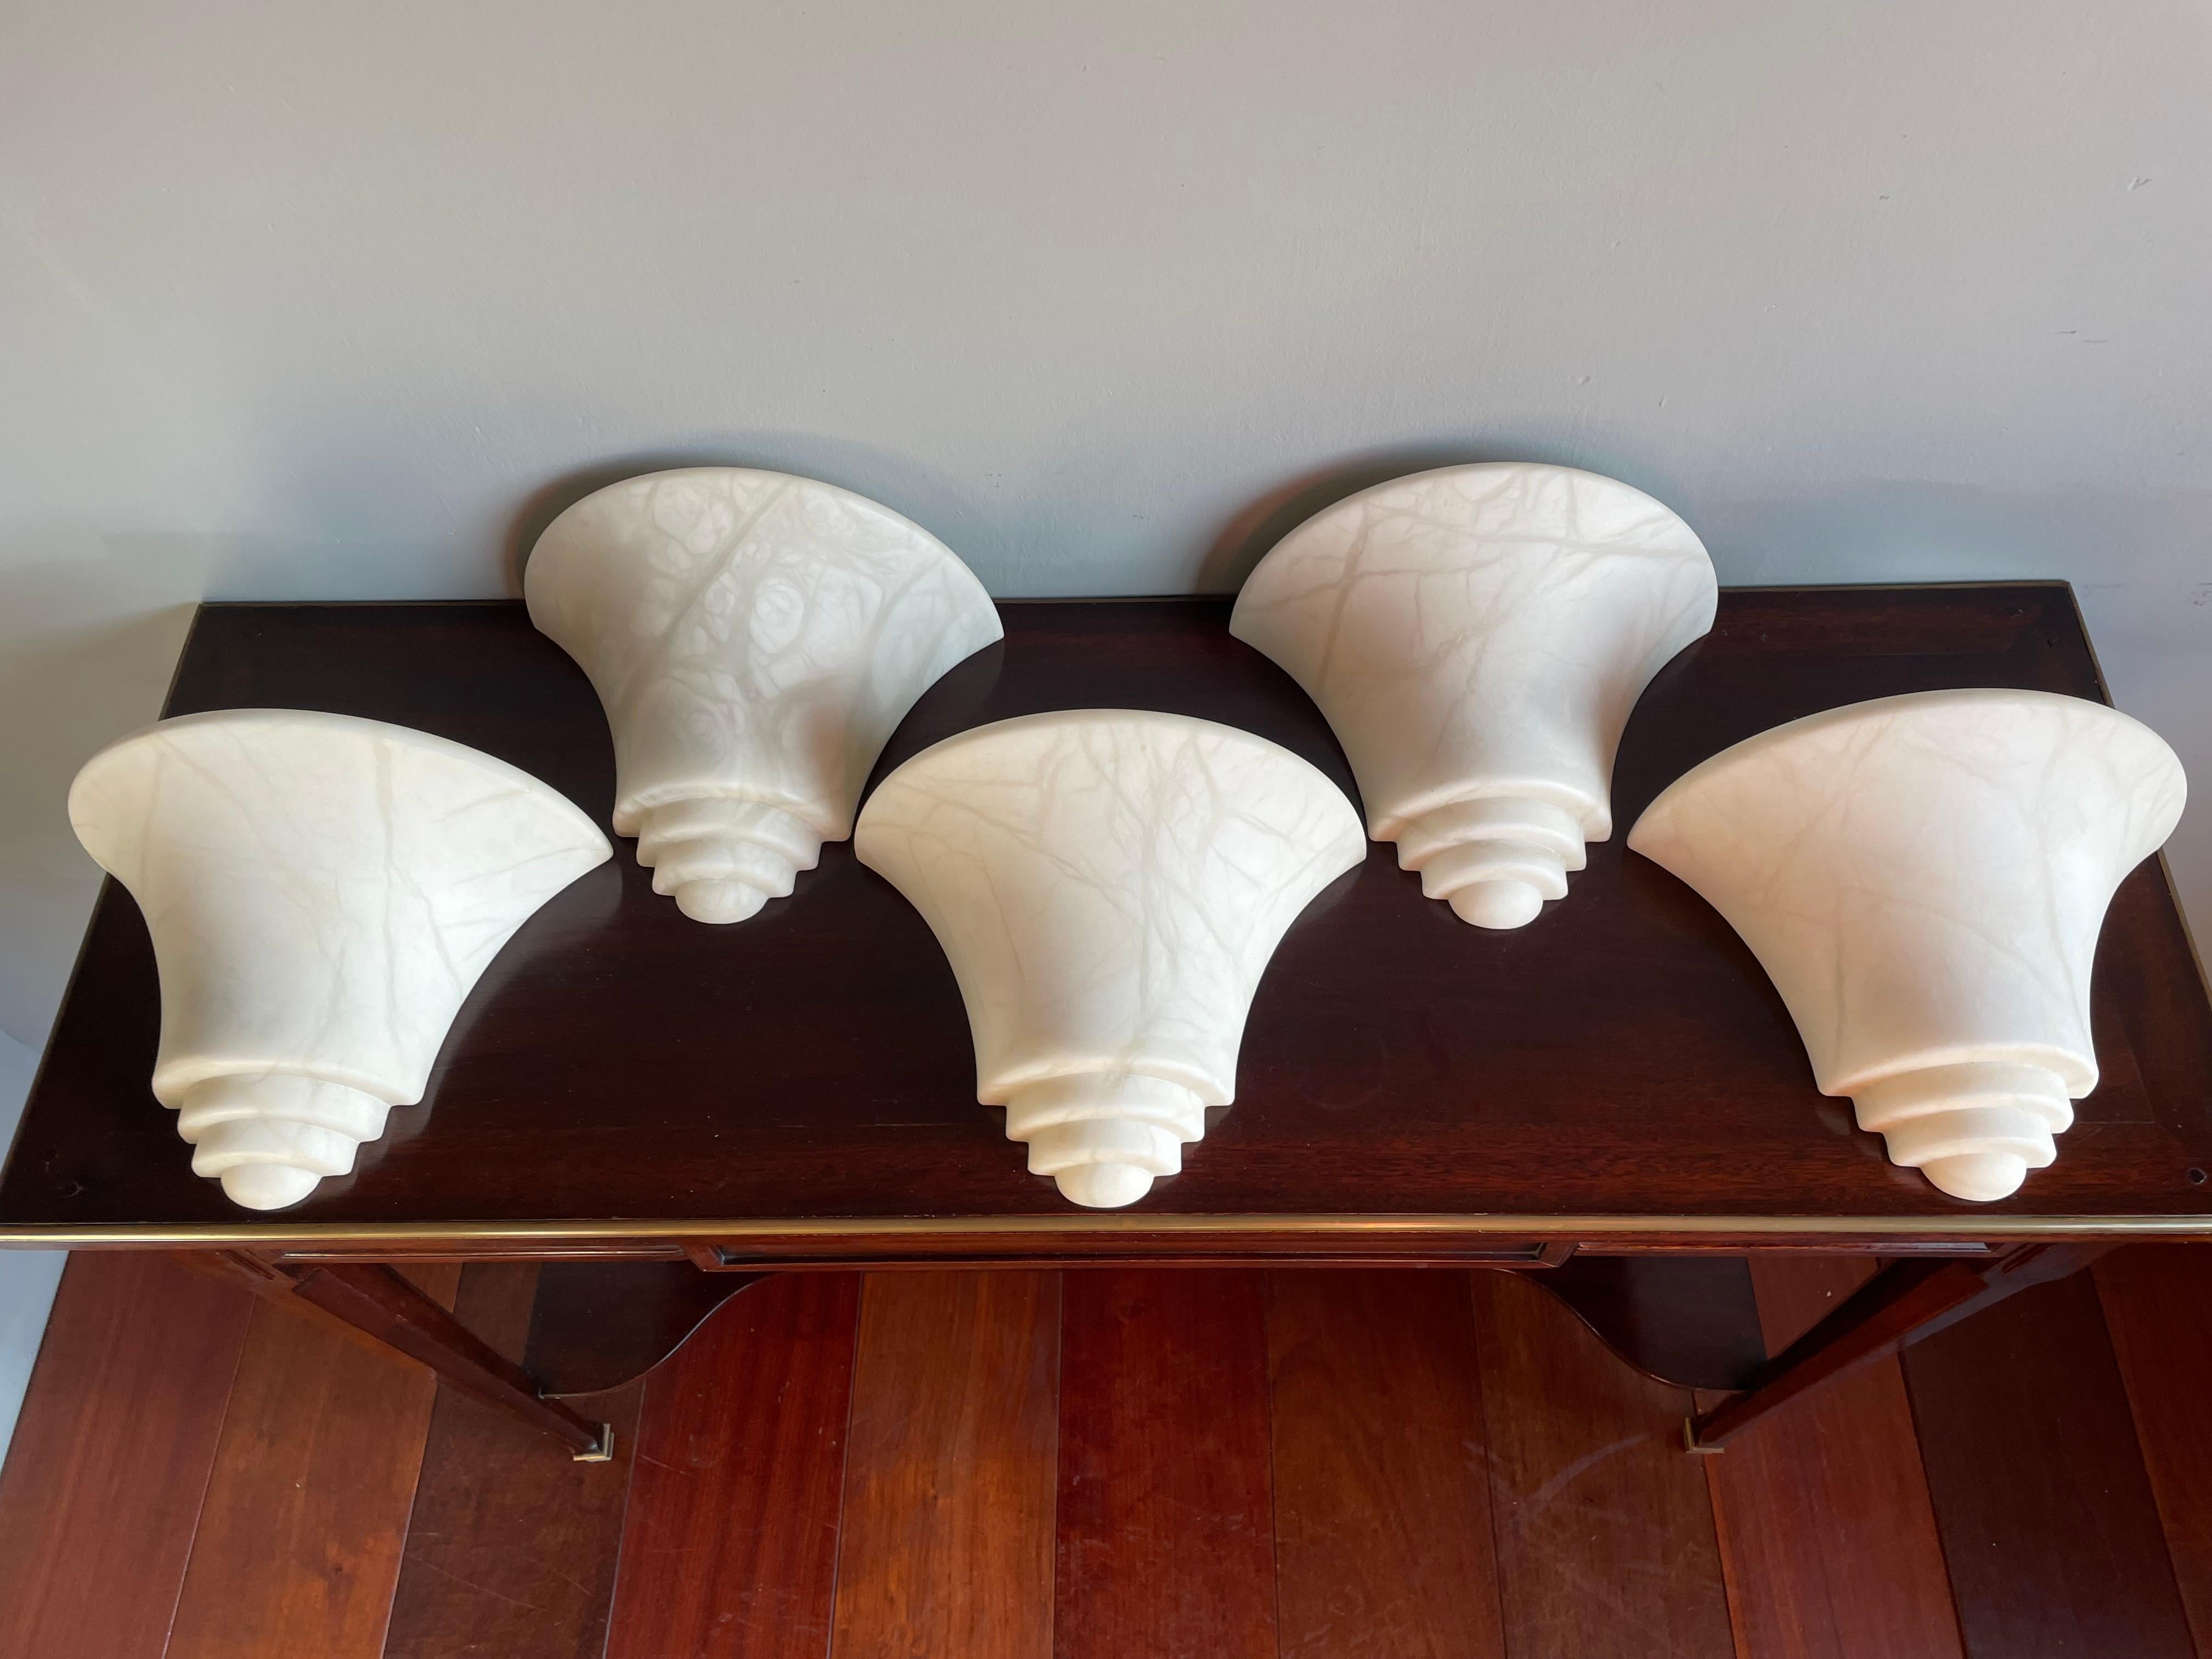 Timeless set of 5 alabaster wall lights for creating the perfect atmosphere.

These good size and great design wall sconces with warm light creating qualities are all in mint condition. There is something about the look and feel of these alabaster